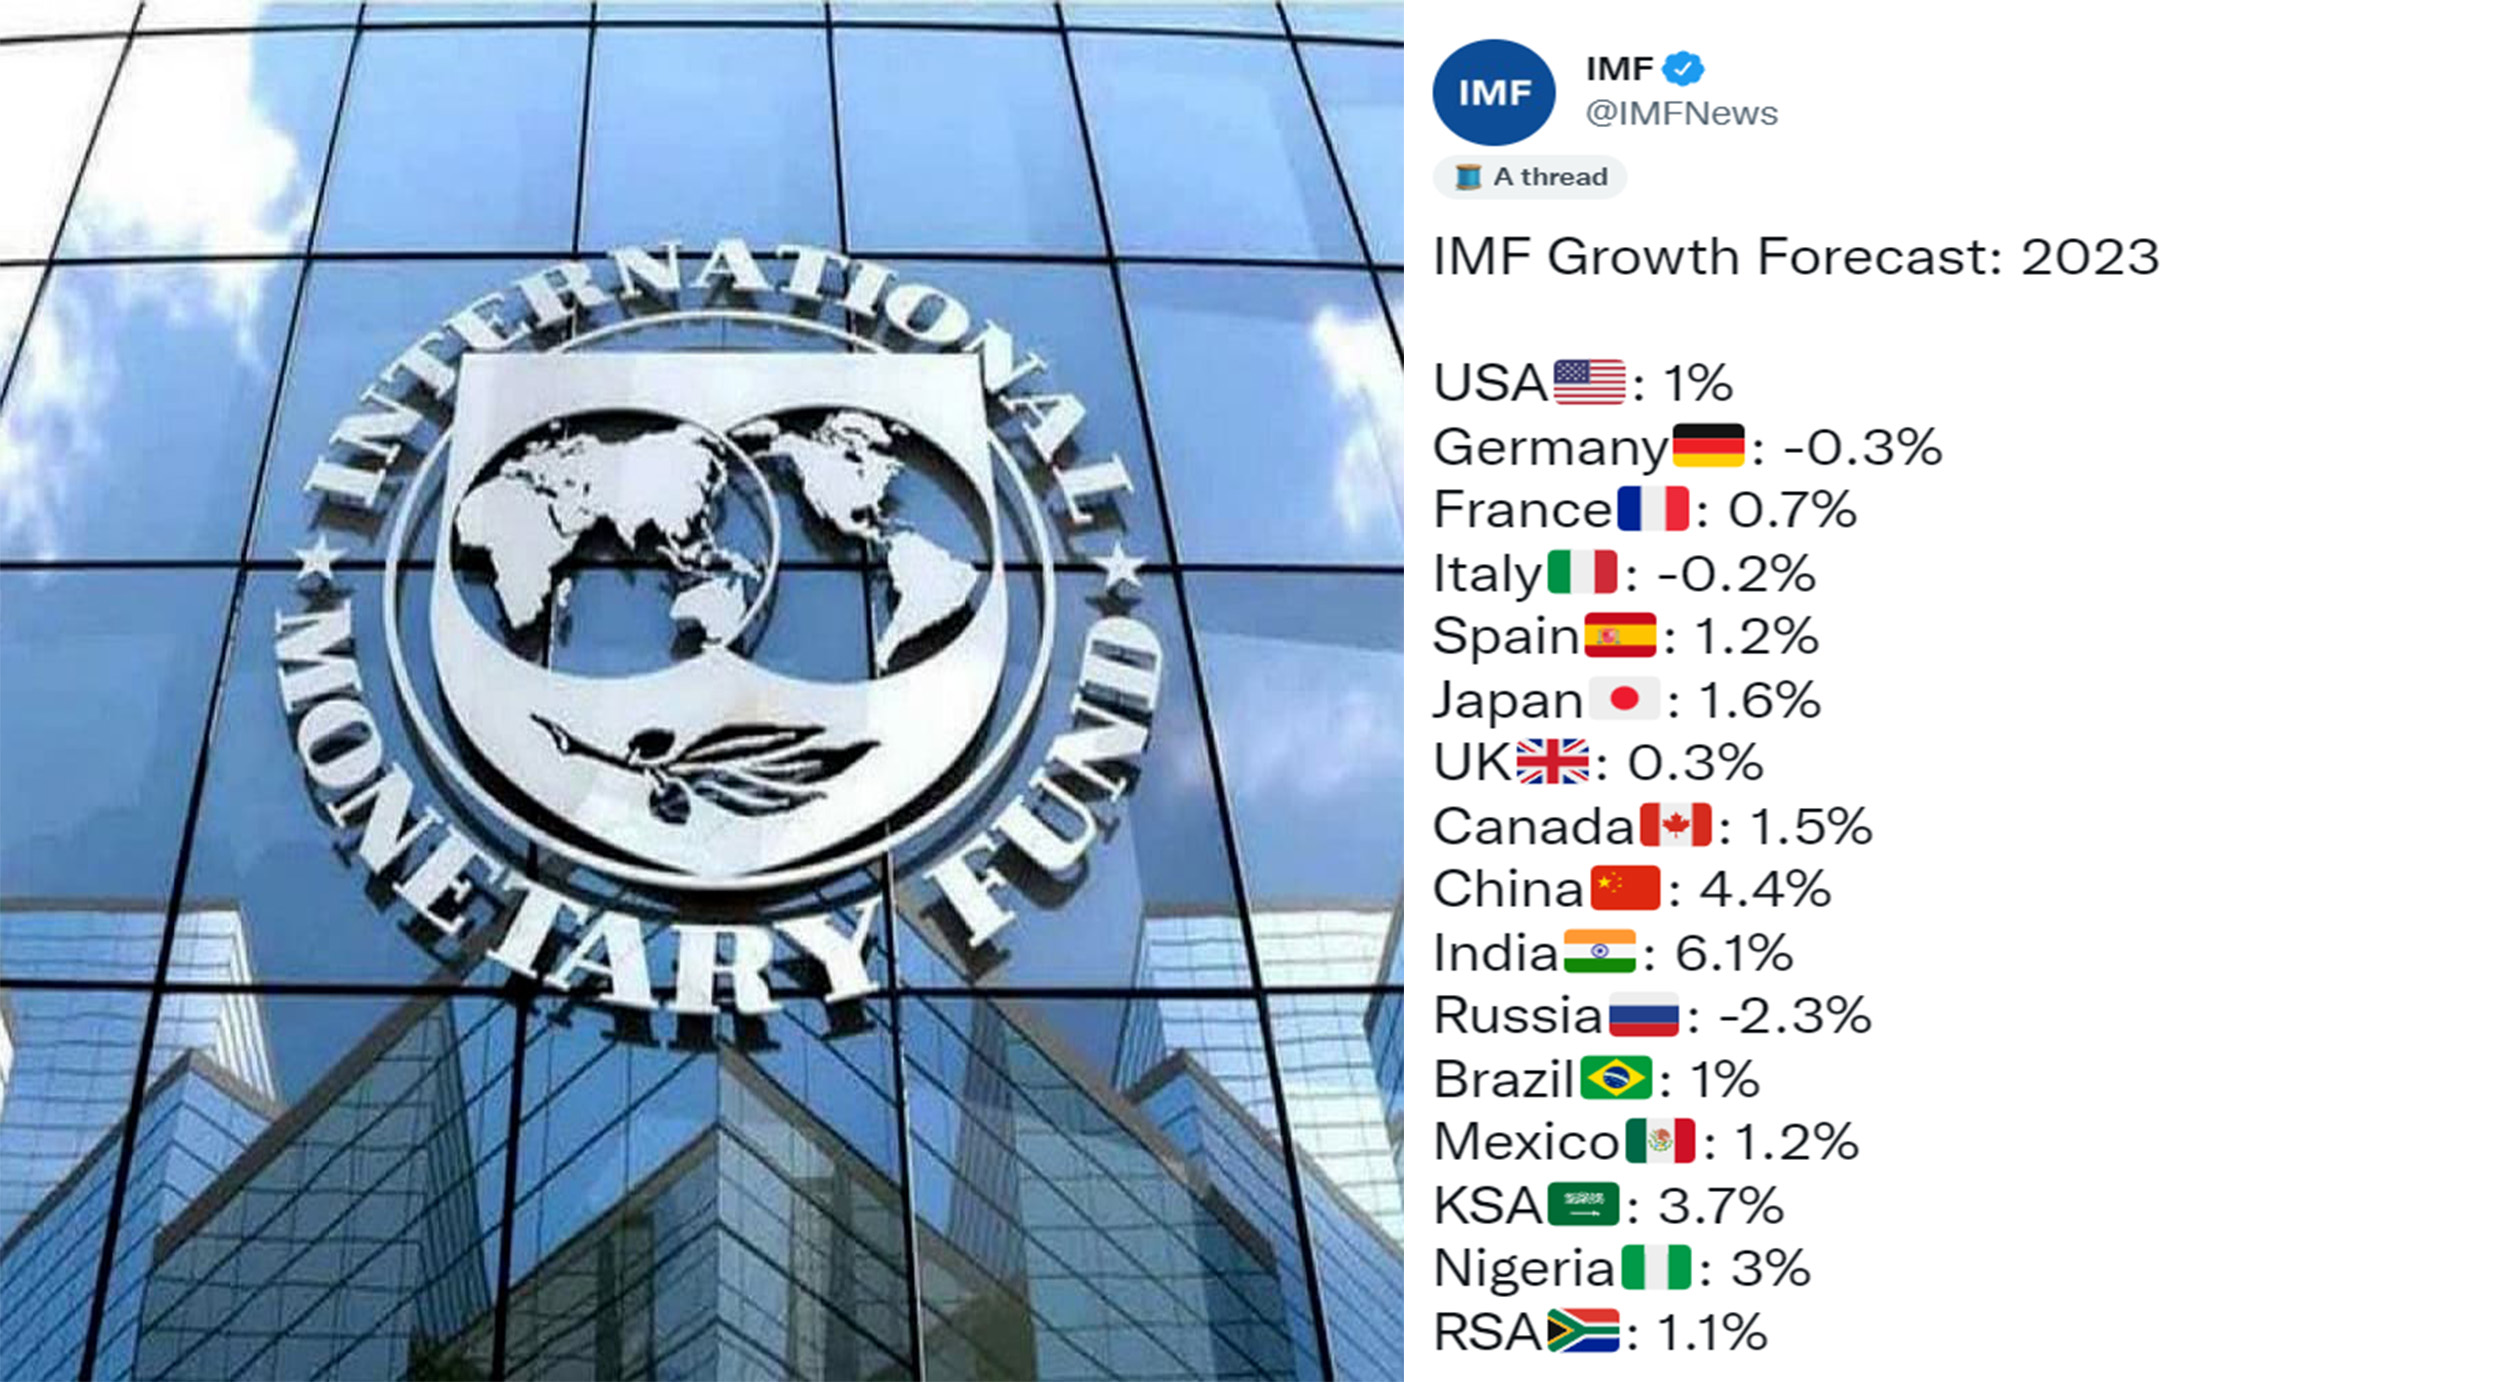 IMF forecasts India’s GDP growth to be 6.1 percent for FY 2023, cuts current estimate by 0.60 percent